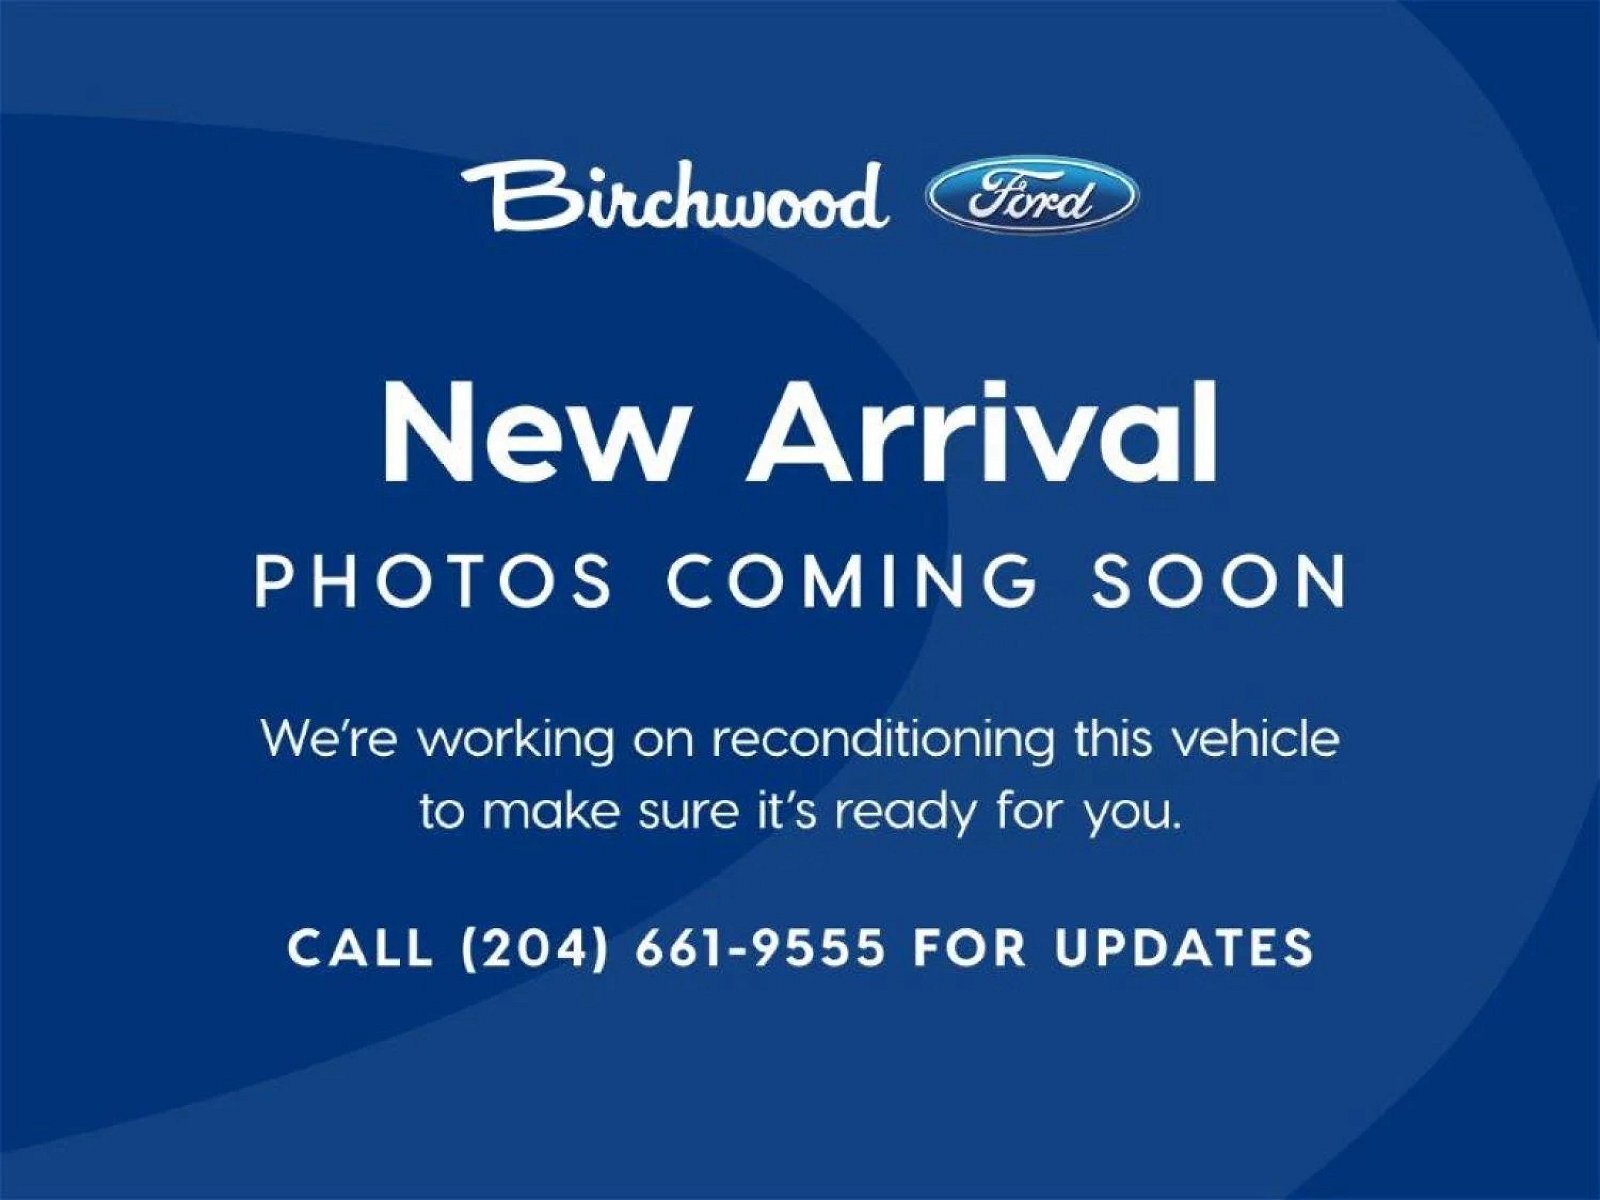 2020 Ford Escape SE AWD | Accident Free | Yes Only 32,000 kms !